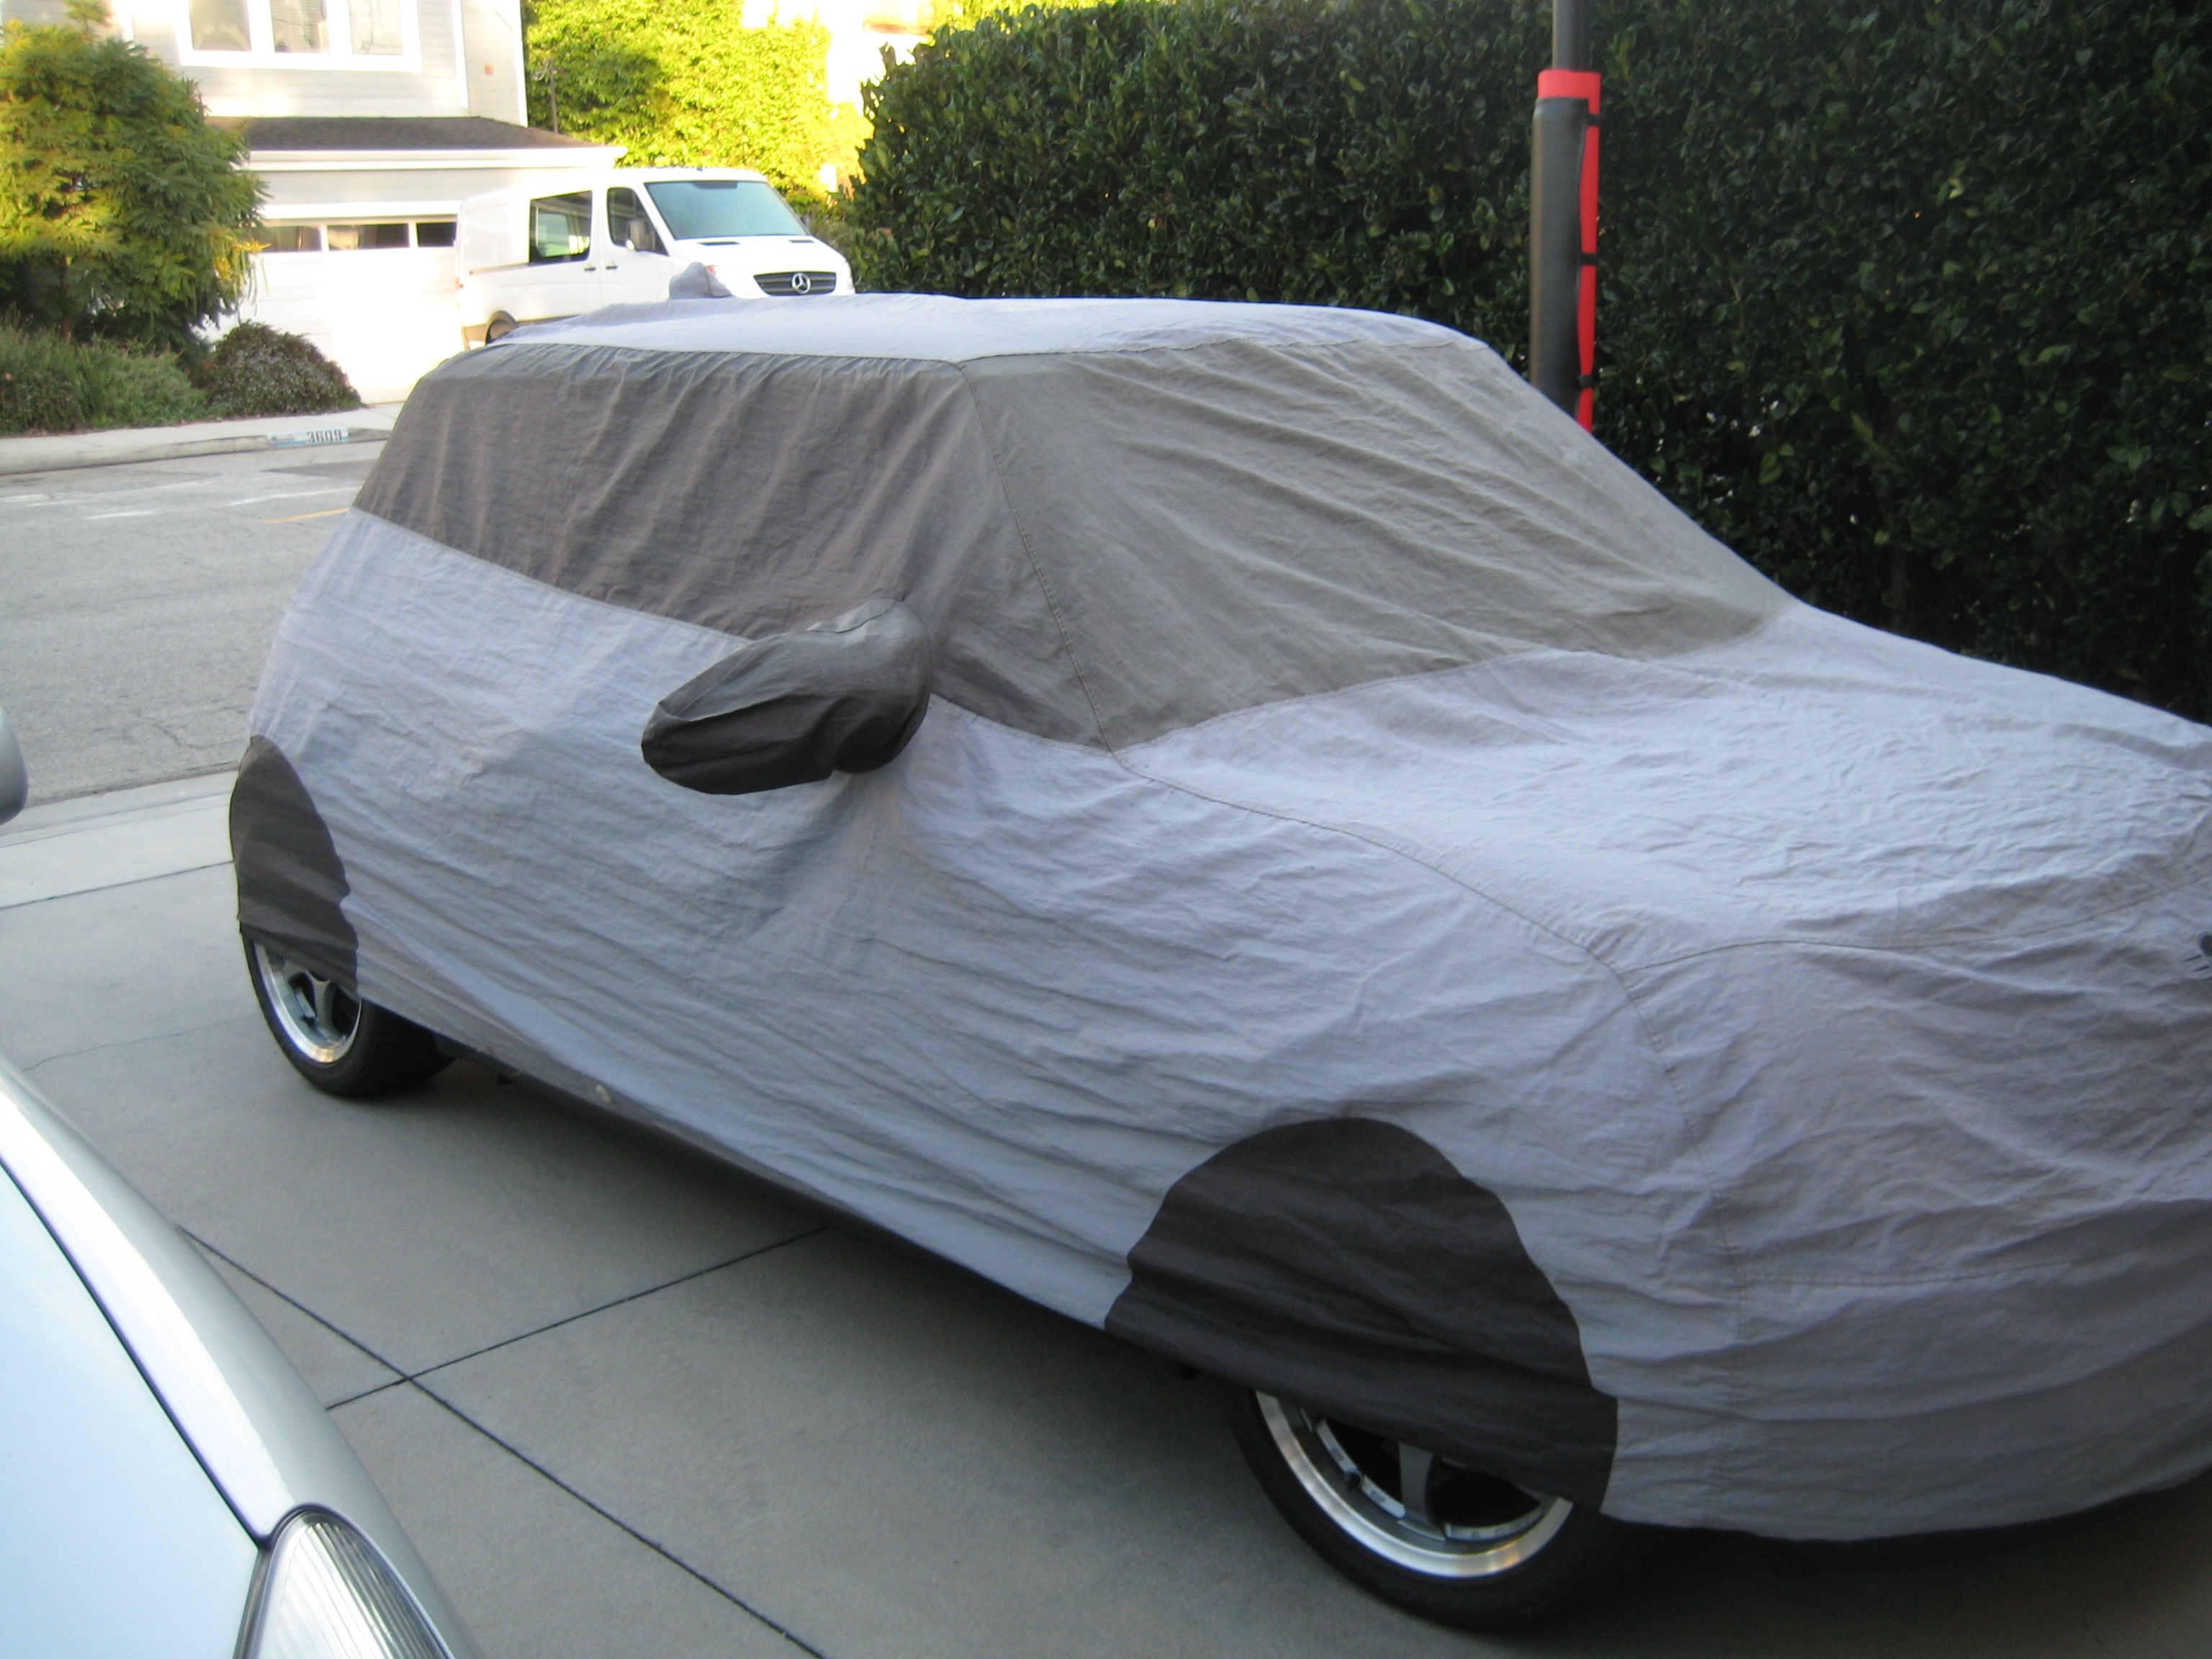 Top 3 Pros. Of Using Car Covers On Your Cars